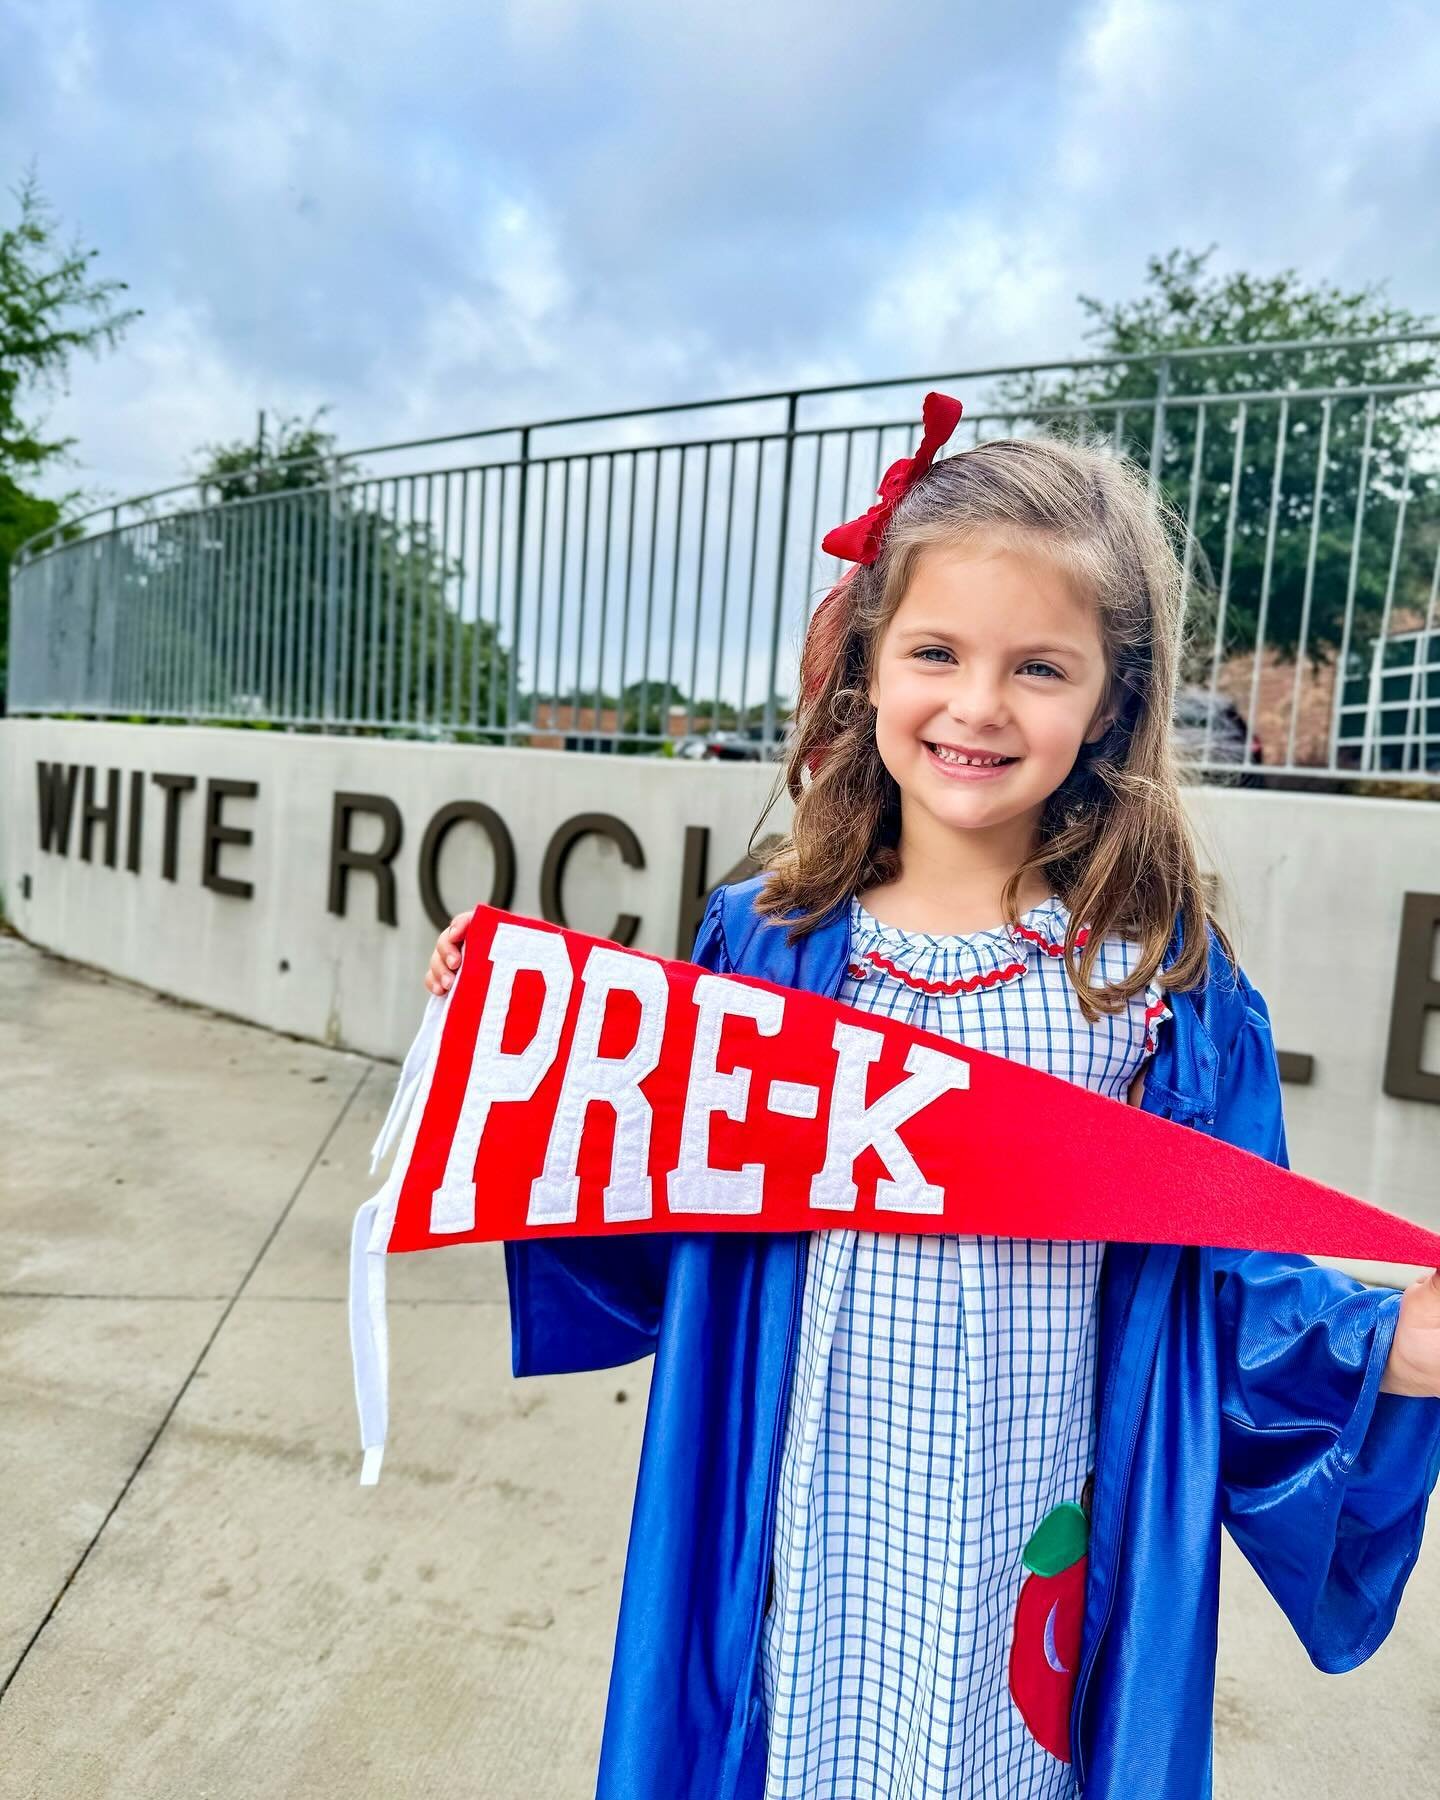 ✌🏻out pre-k! Emilia is so ready for kindergarten! While she&rsquo;s already at our sweet elementary school, she is so ready to be a &ldquo;big kid&rdquo; next year. Her teacher described her as smart, kind, sharp, and a helper. We are so proud! (But